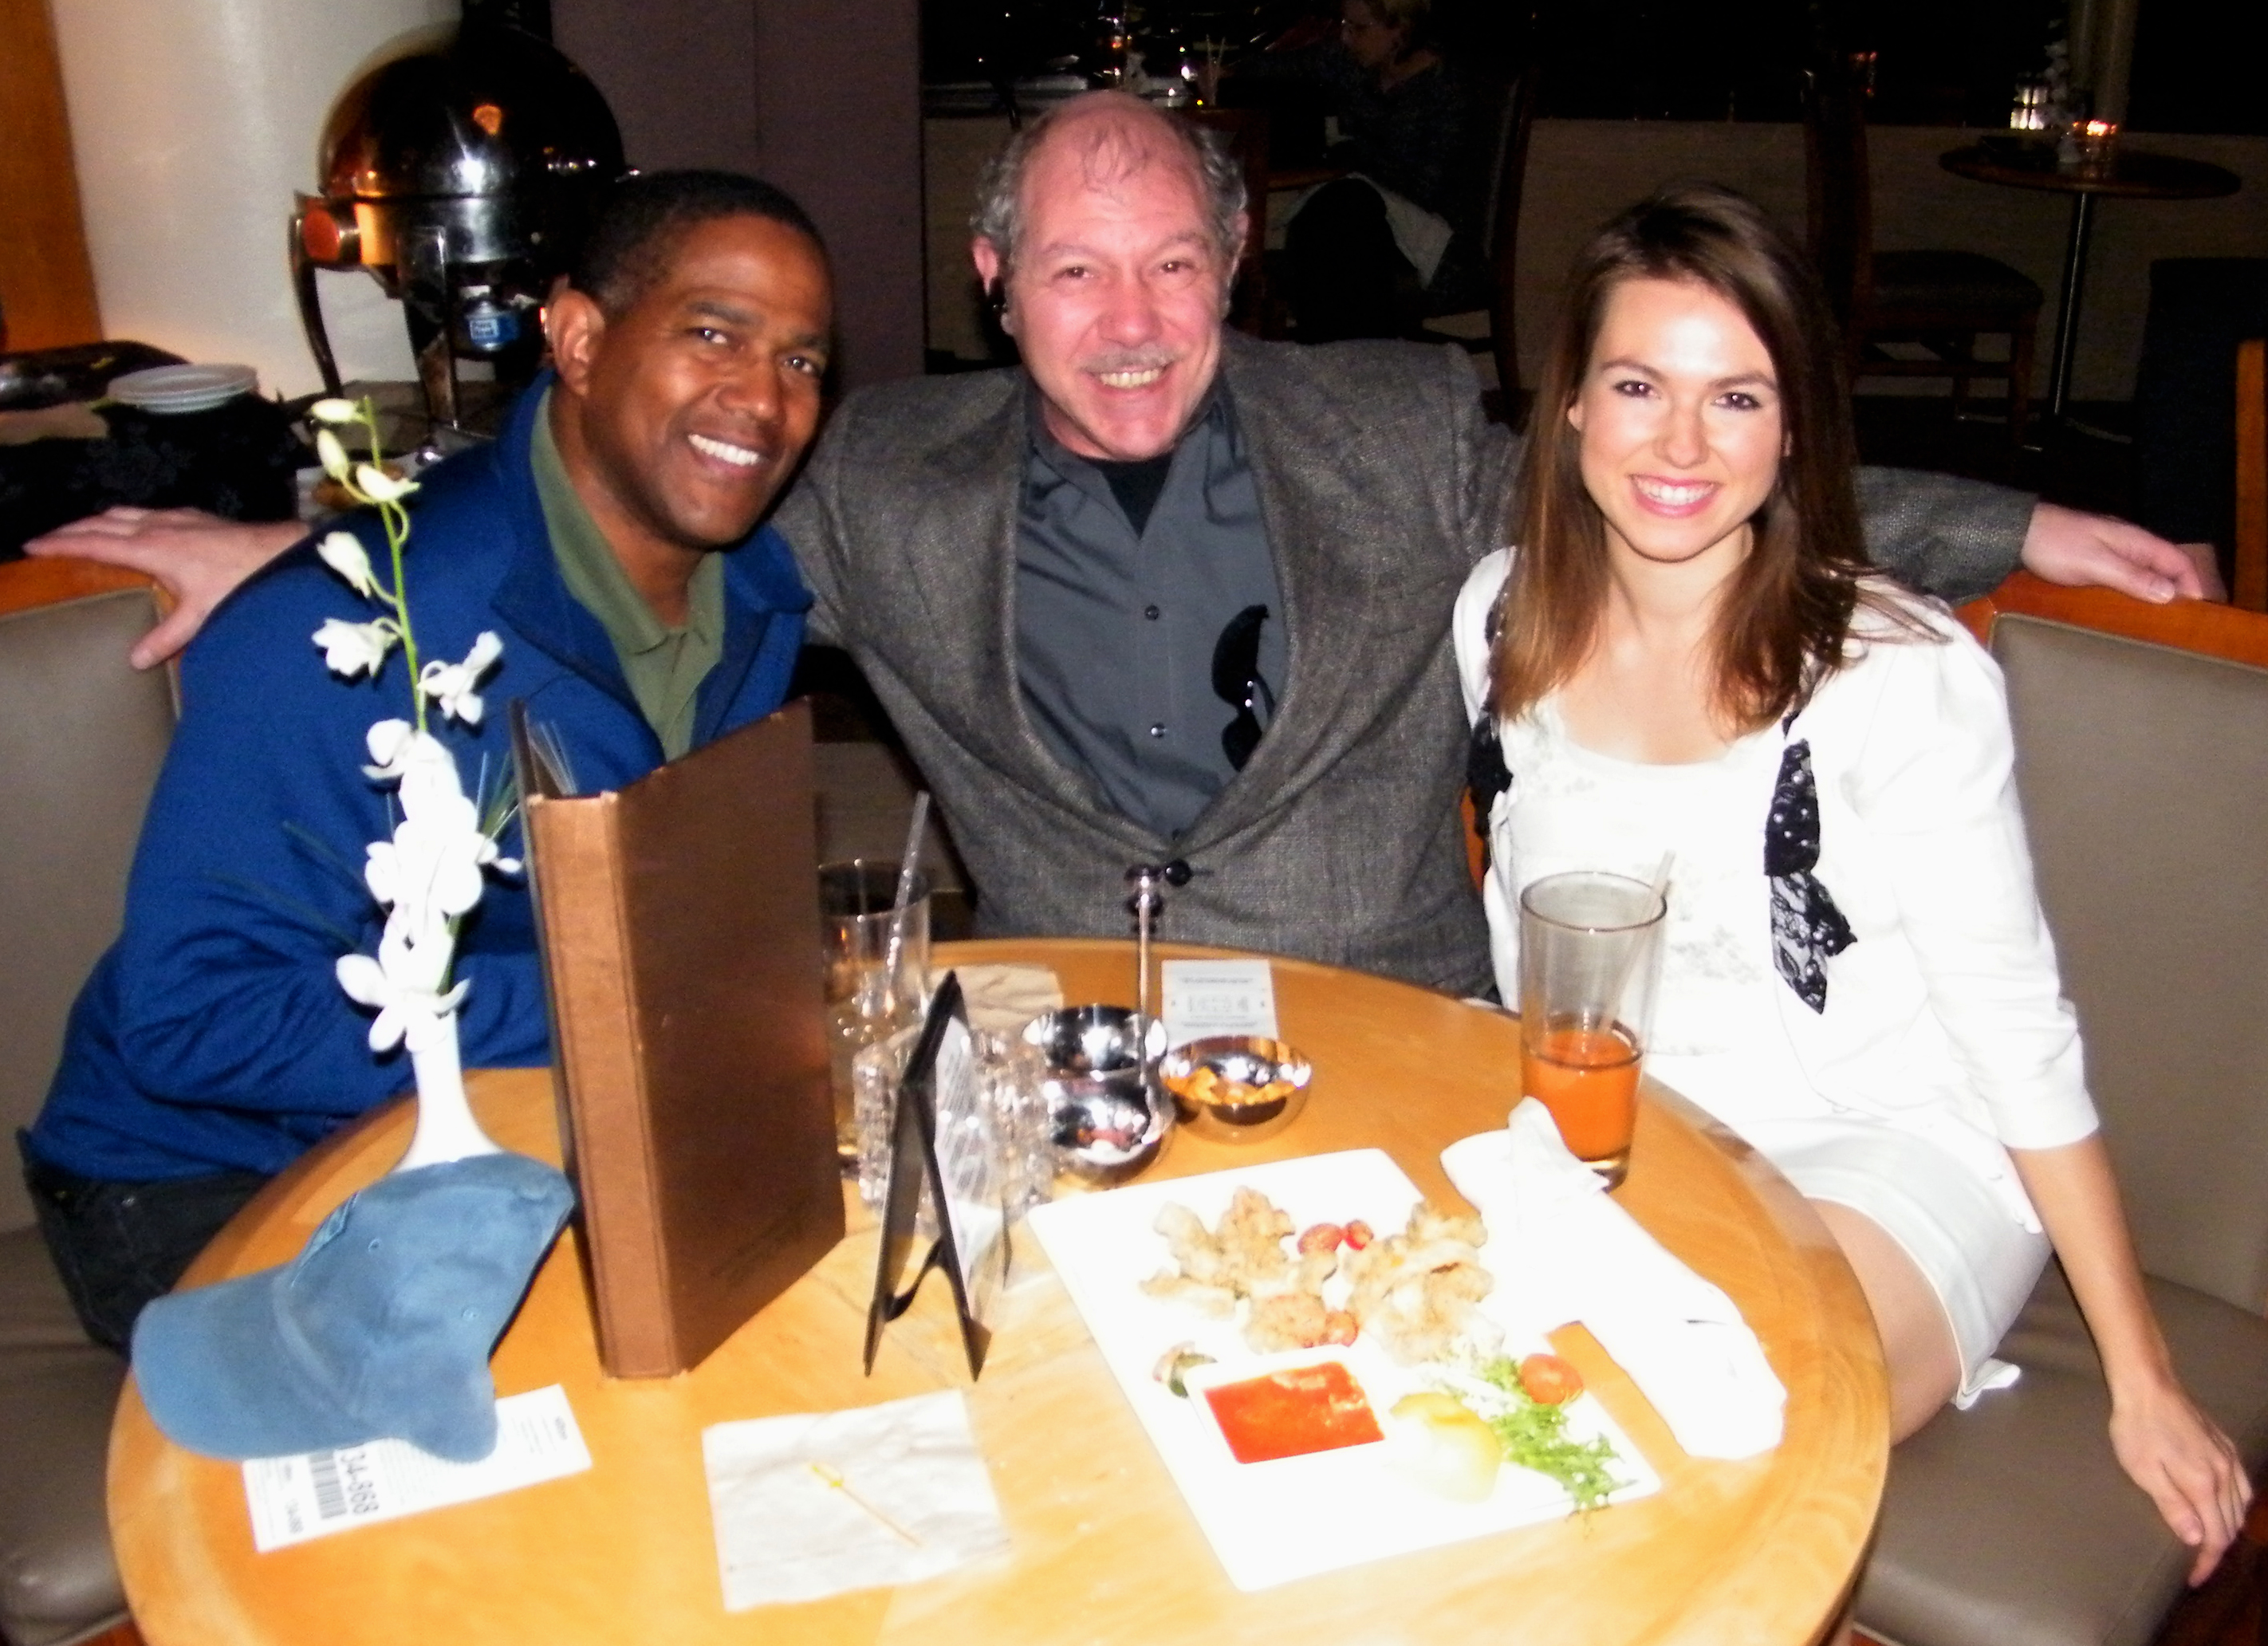 Emmy Award winner Kelvin Garvanne, Writer and Director James M. De Vince, and Miss California Contestant 2013 Emily Kraudel at the Universal Hilton in Universal City.